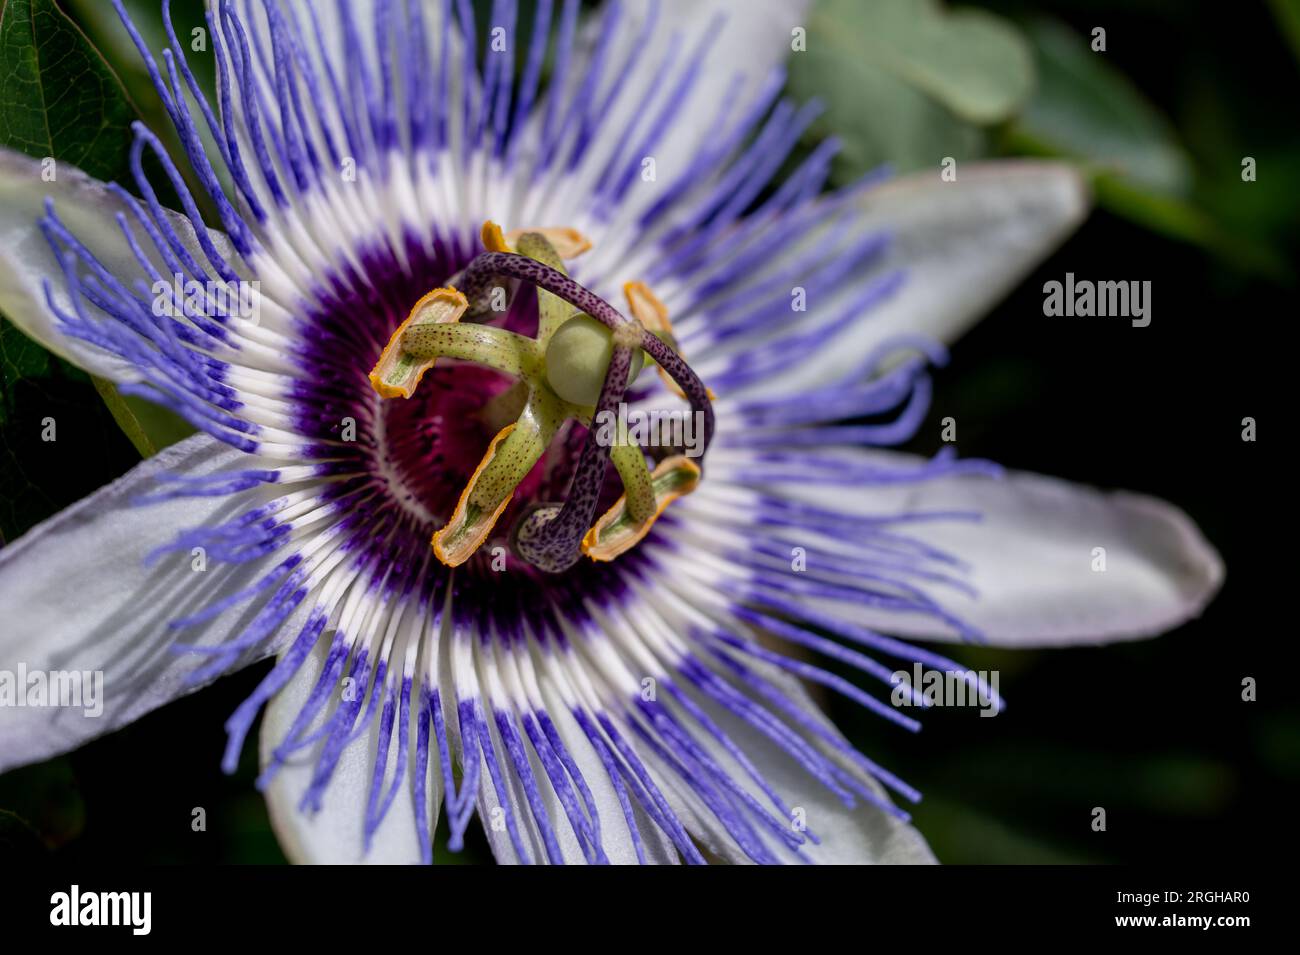 Close-up of passion flower. Passiflora caerulea blooming. Blue passionflower. Bluecrown passionflower. One common passion flower. Stock Photo